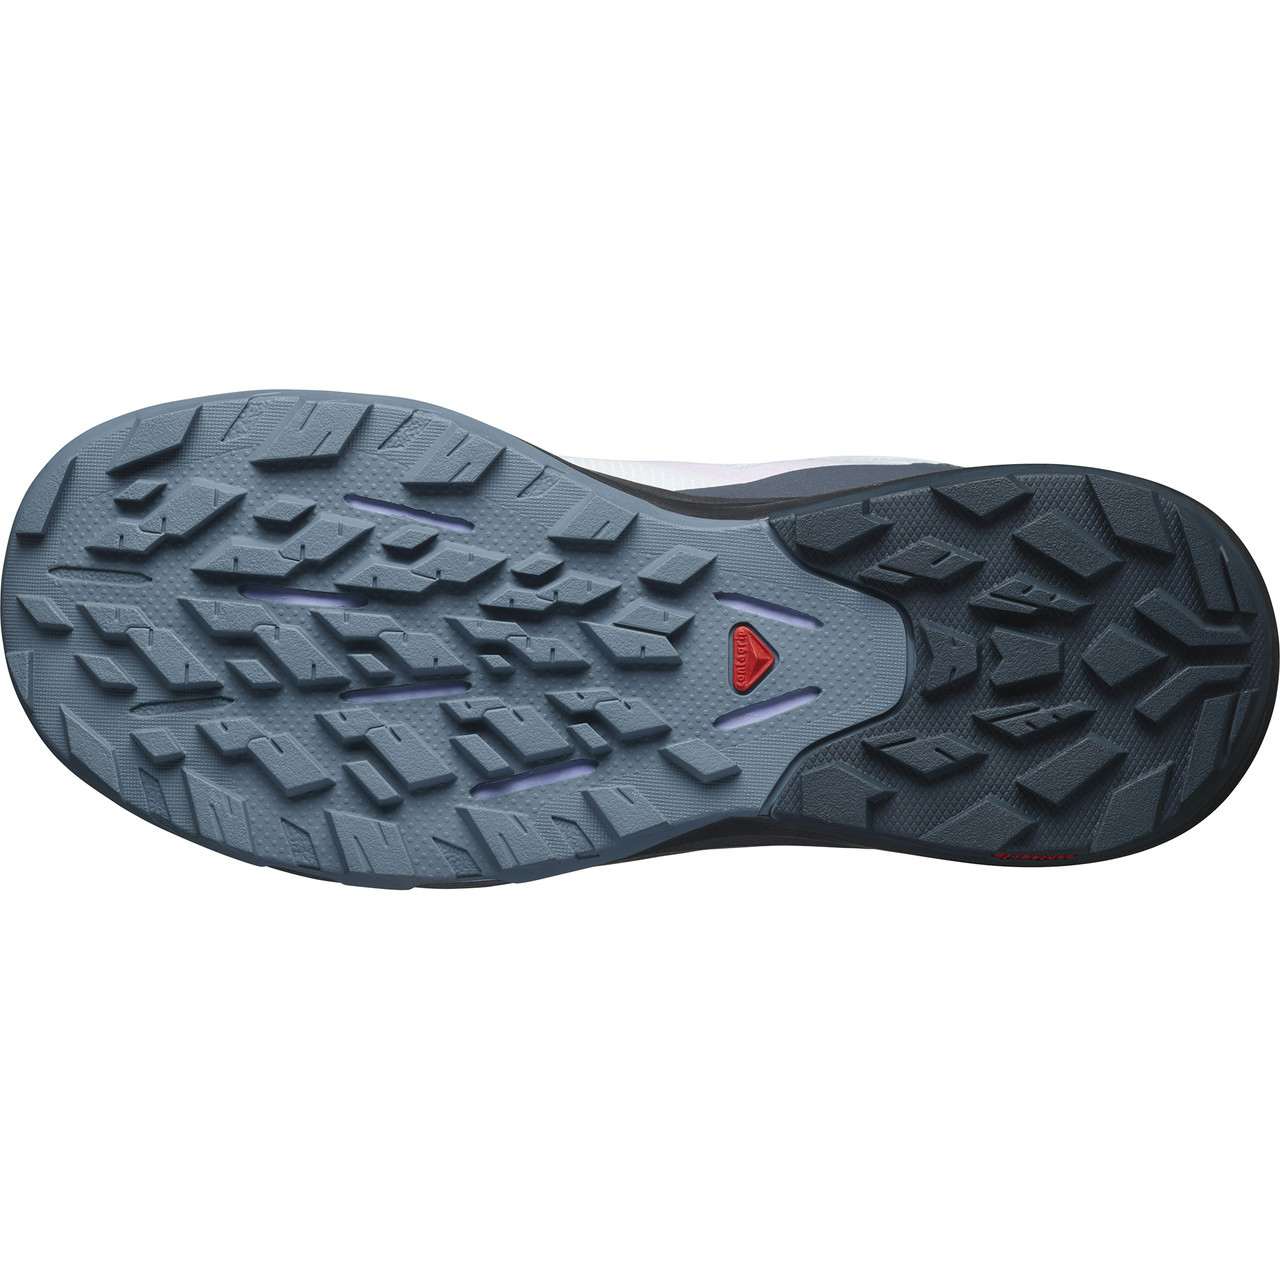 OUTpulse Mid Gore-Tex Light Trail Shoes Artic Ice/India Ink/Orchi